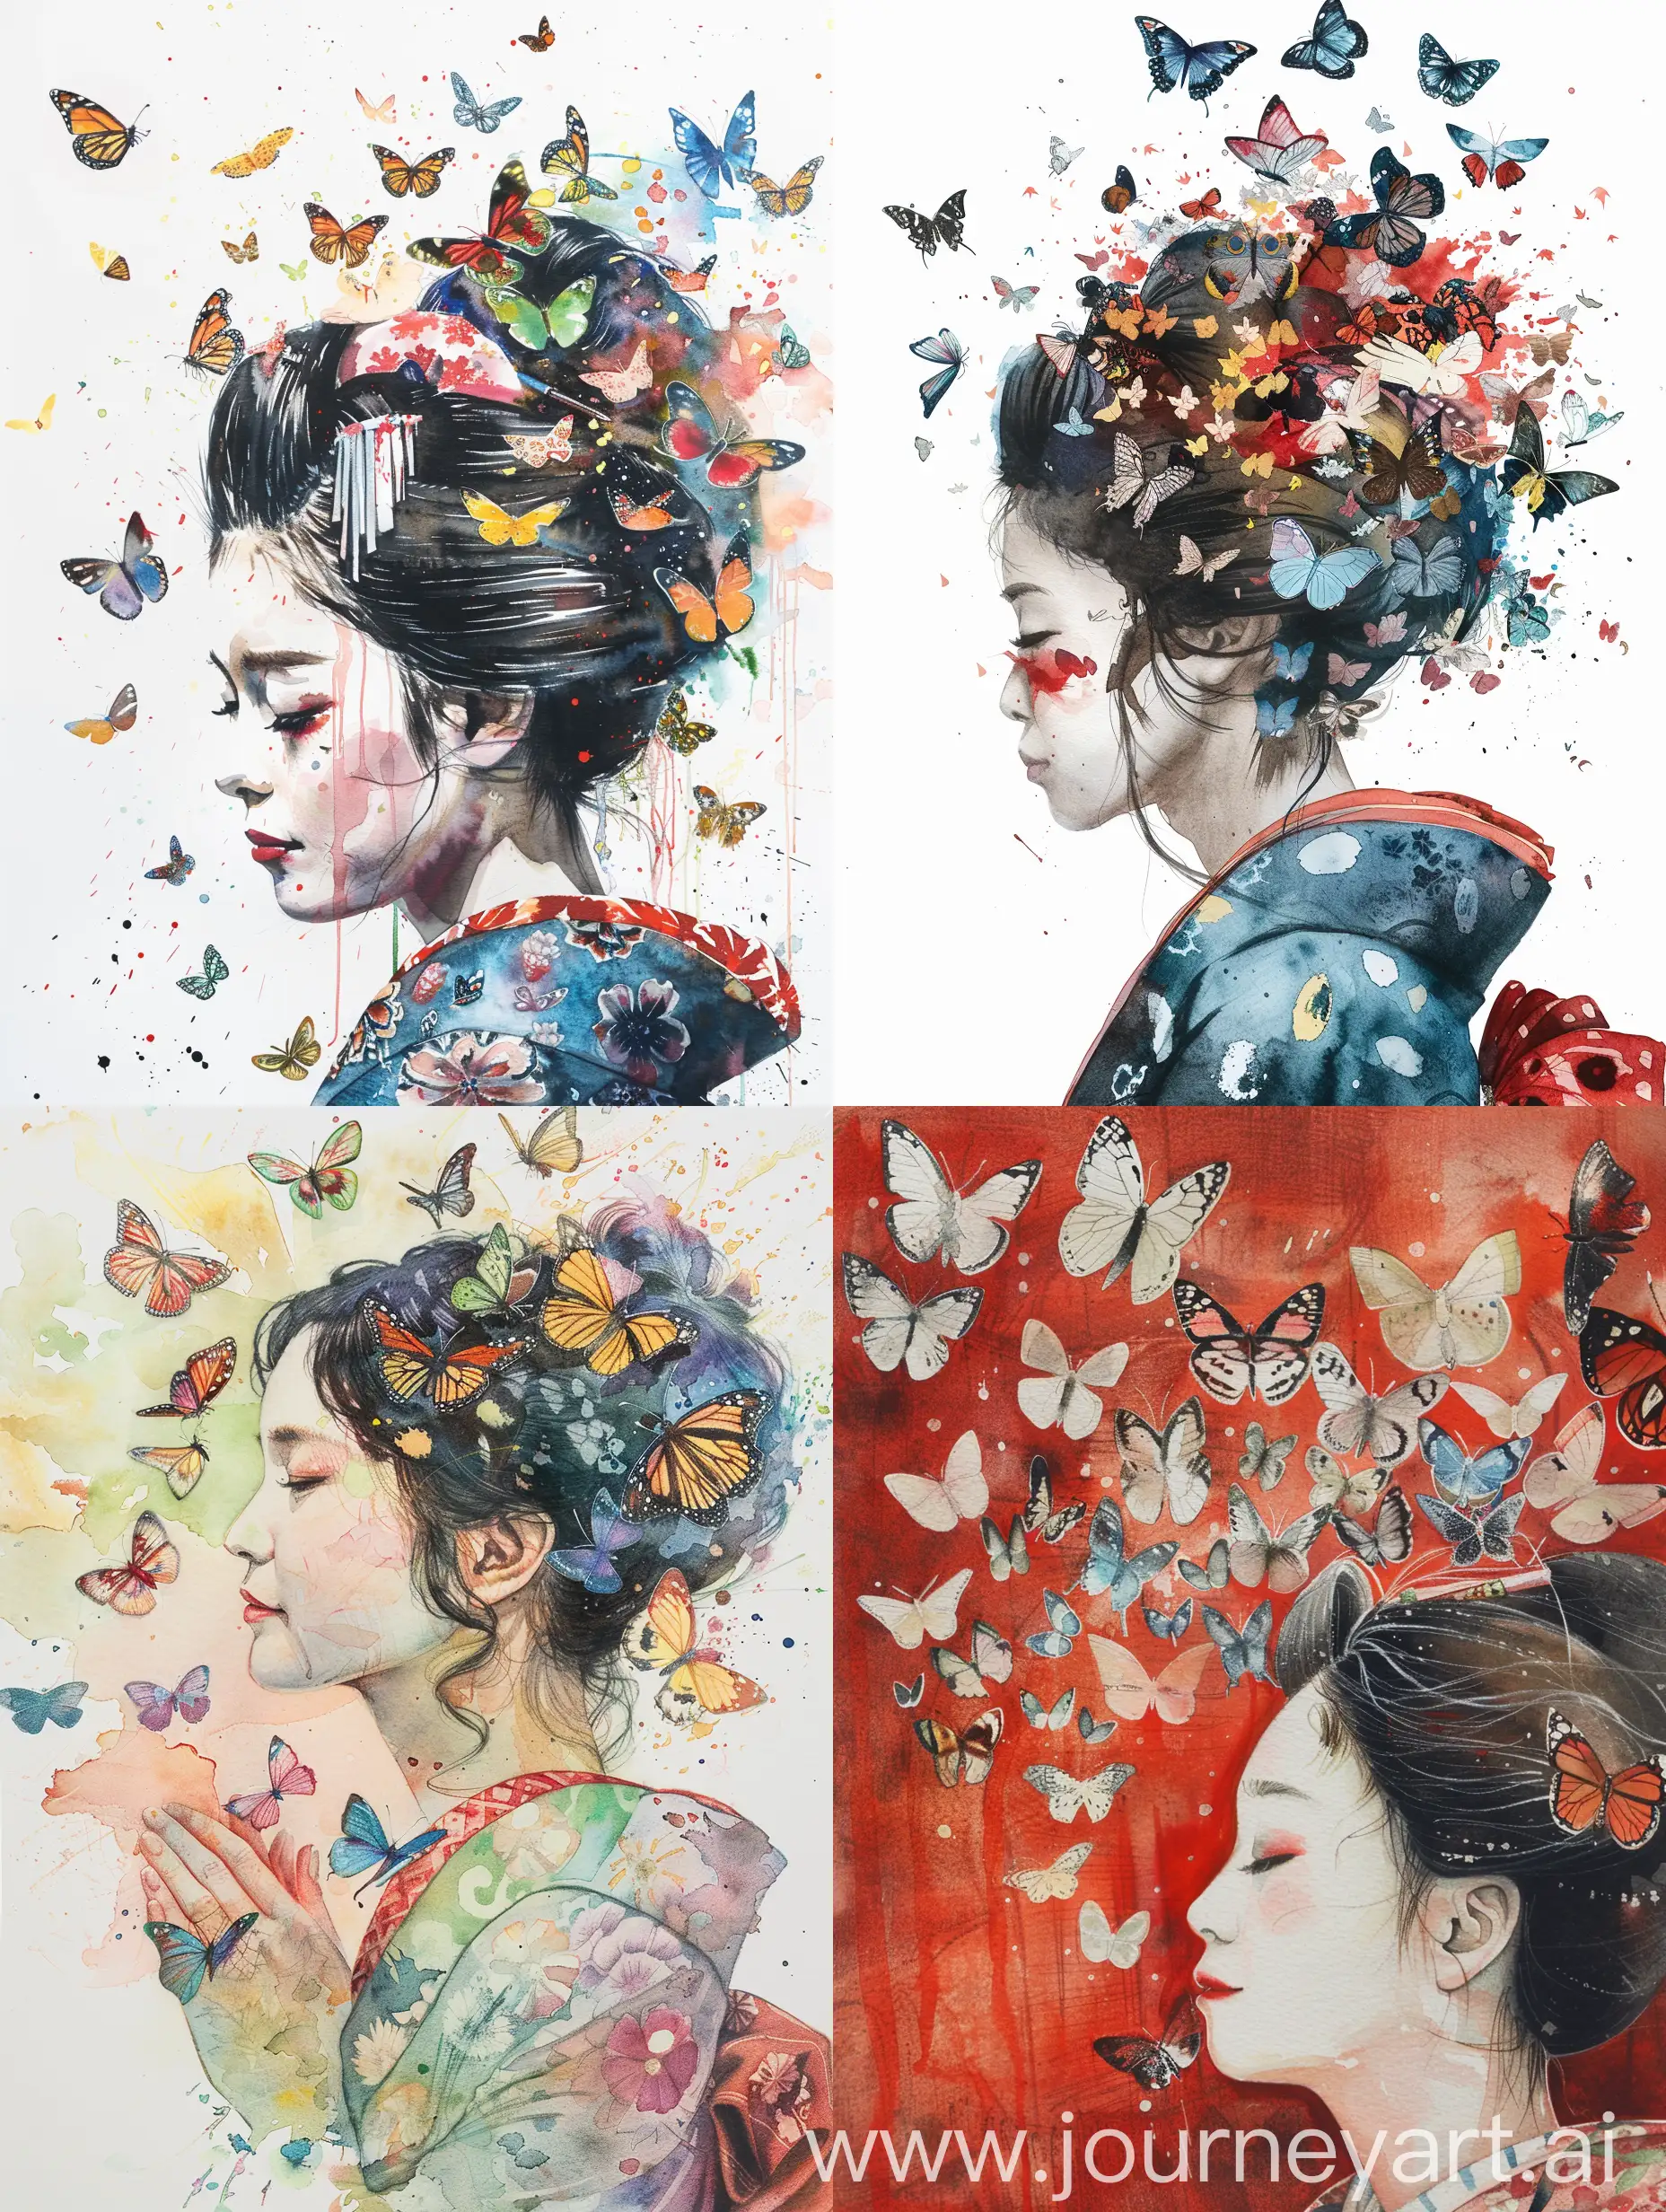 Elegant-Japanese-Lady-in-Traditional-Kimono-Surrounded-by-Fluttering-Butterflies-on-a-Dreamy-Watercolor-Background